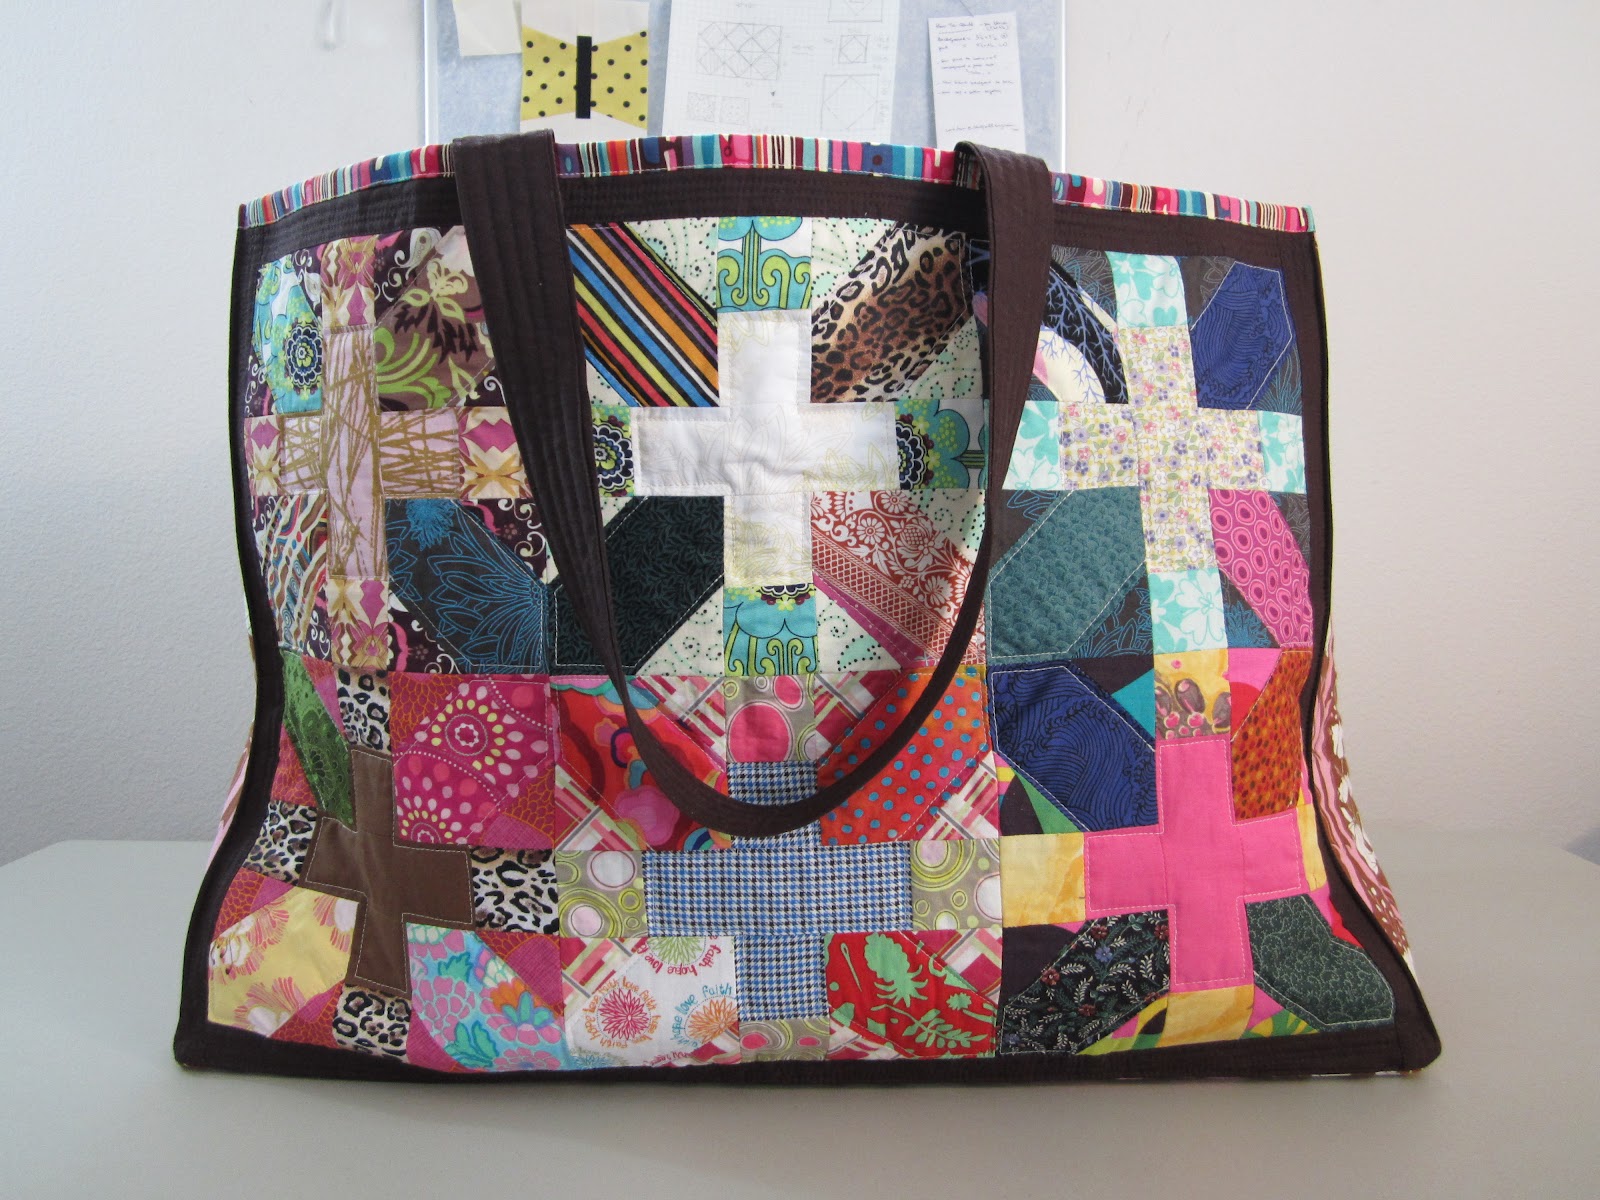 patsy johnson quilts: The IT Tote